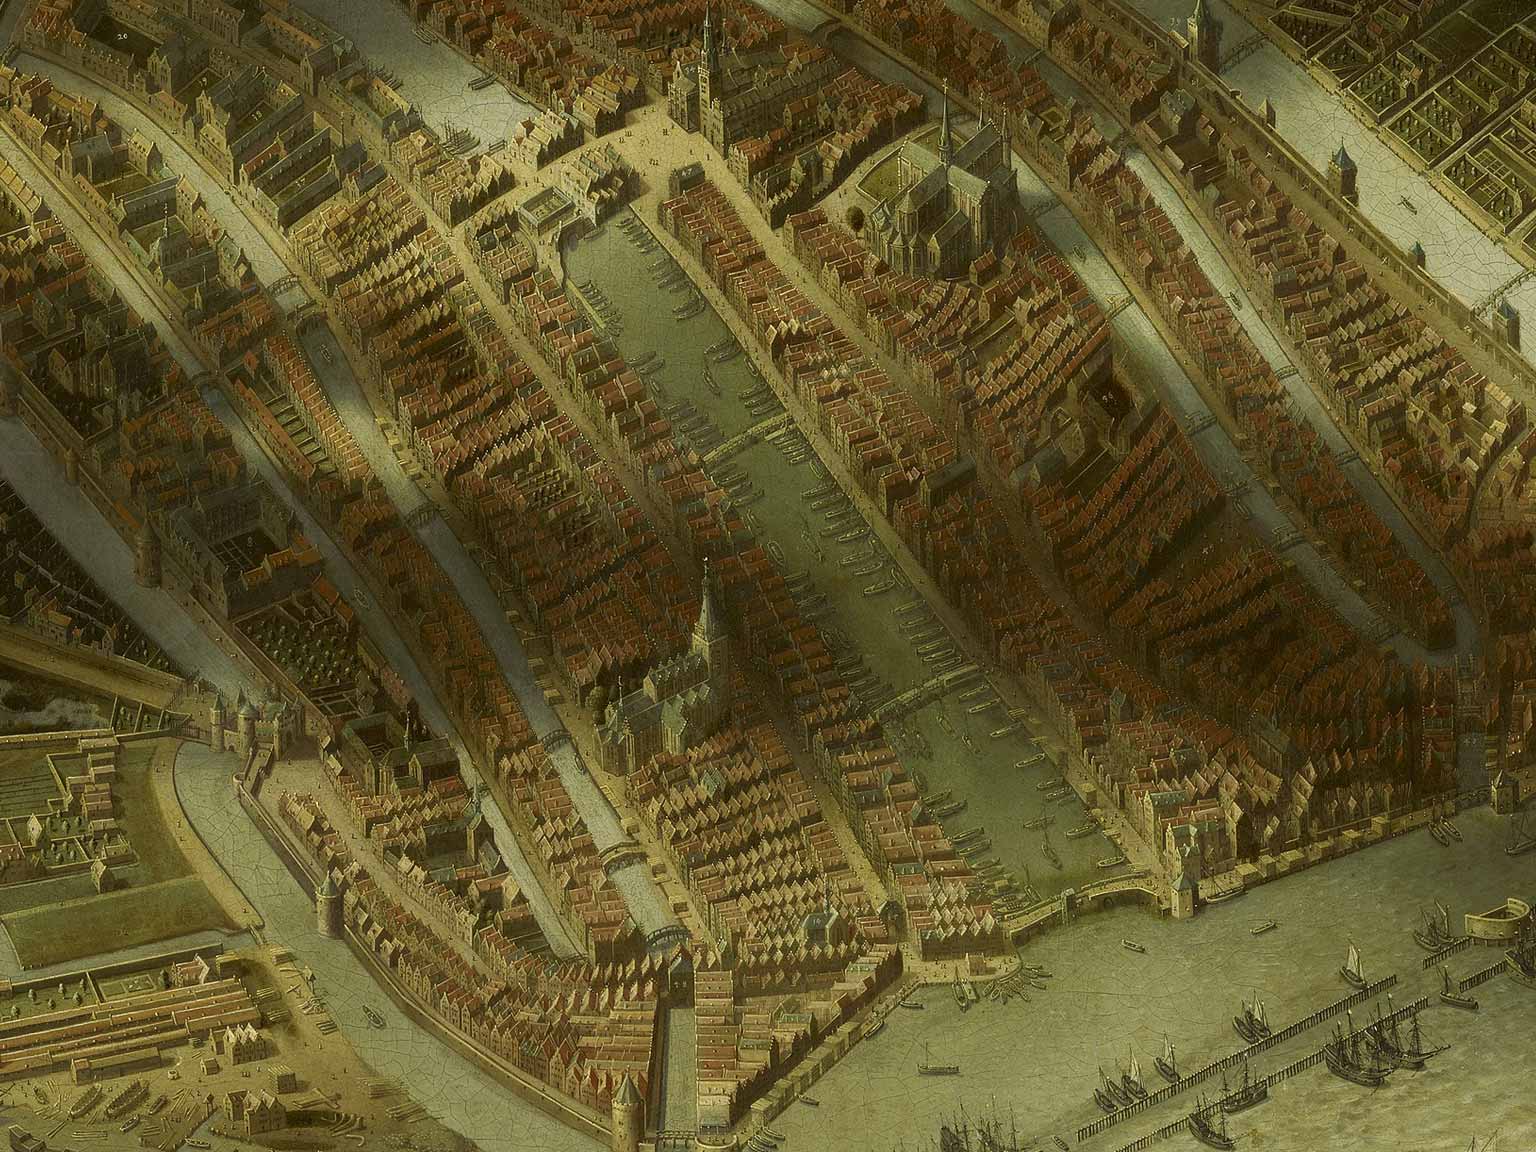 Amsterdam in 1544, detail of a painting by Jan Micker, Damrak in the center